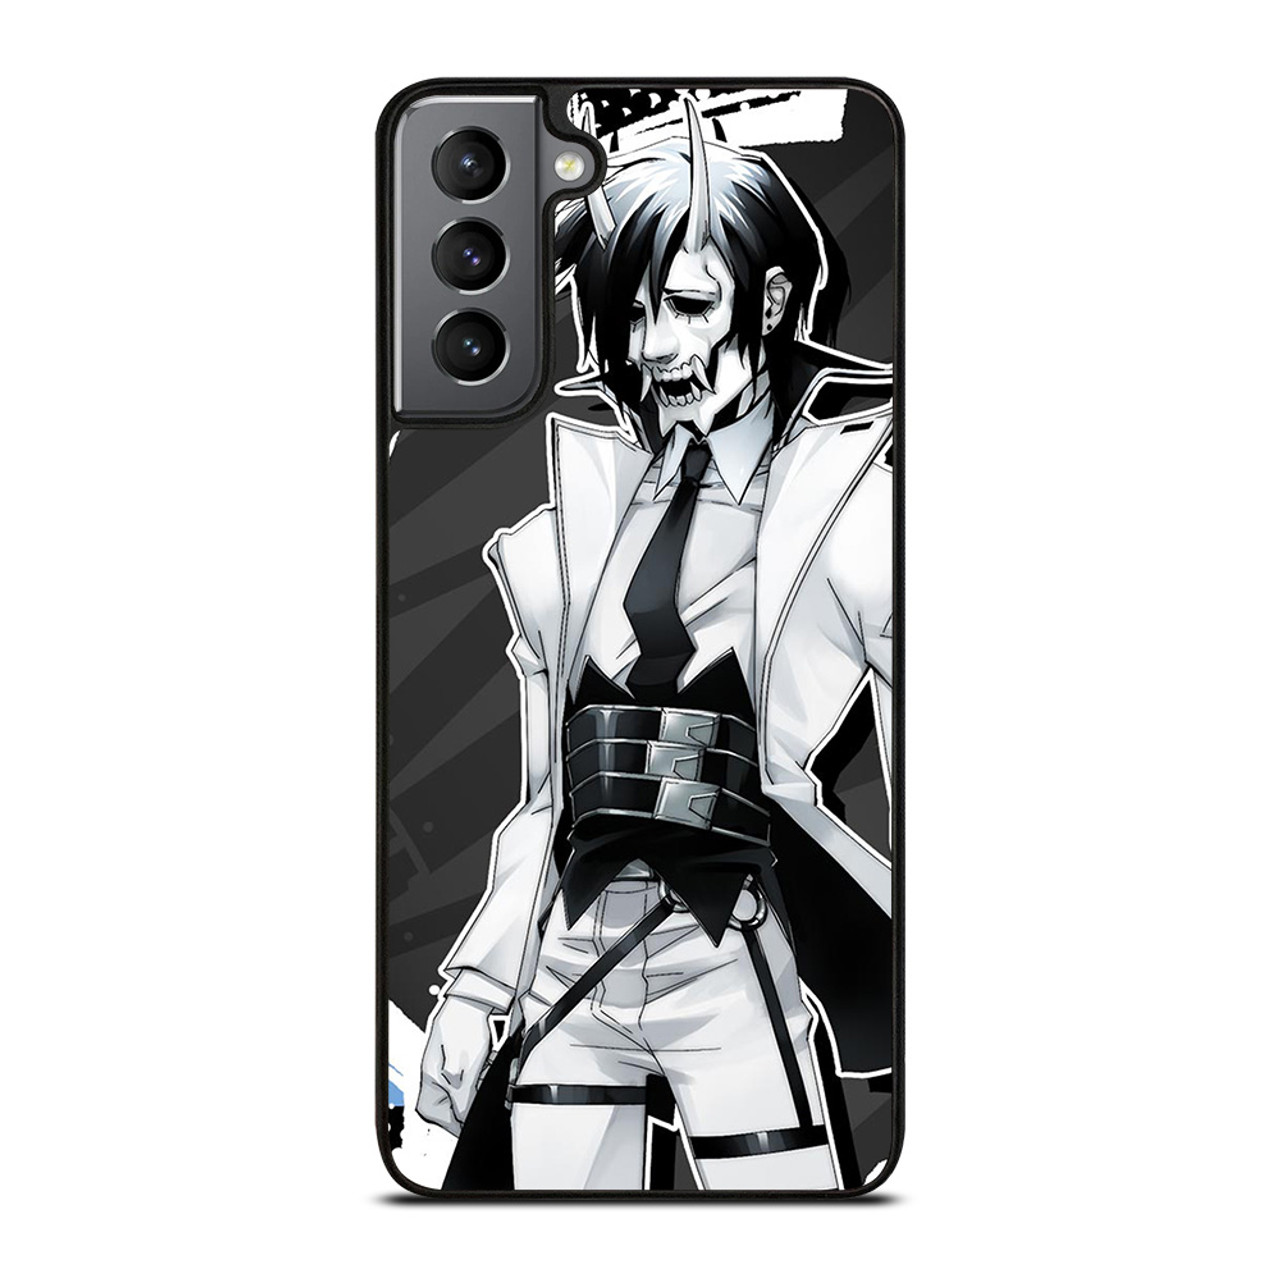 NEON WHITE GAMES CHARACTERS Samsung Galaxy S21 Plus Case Cover